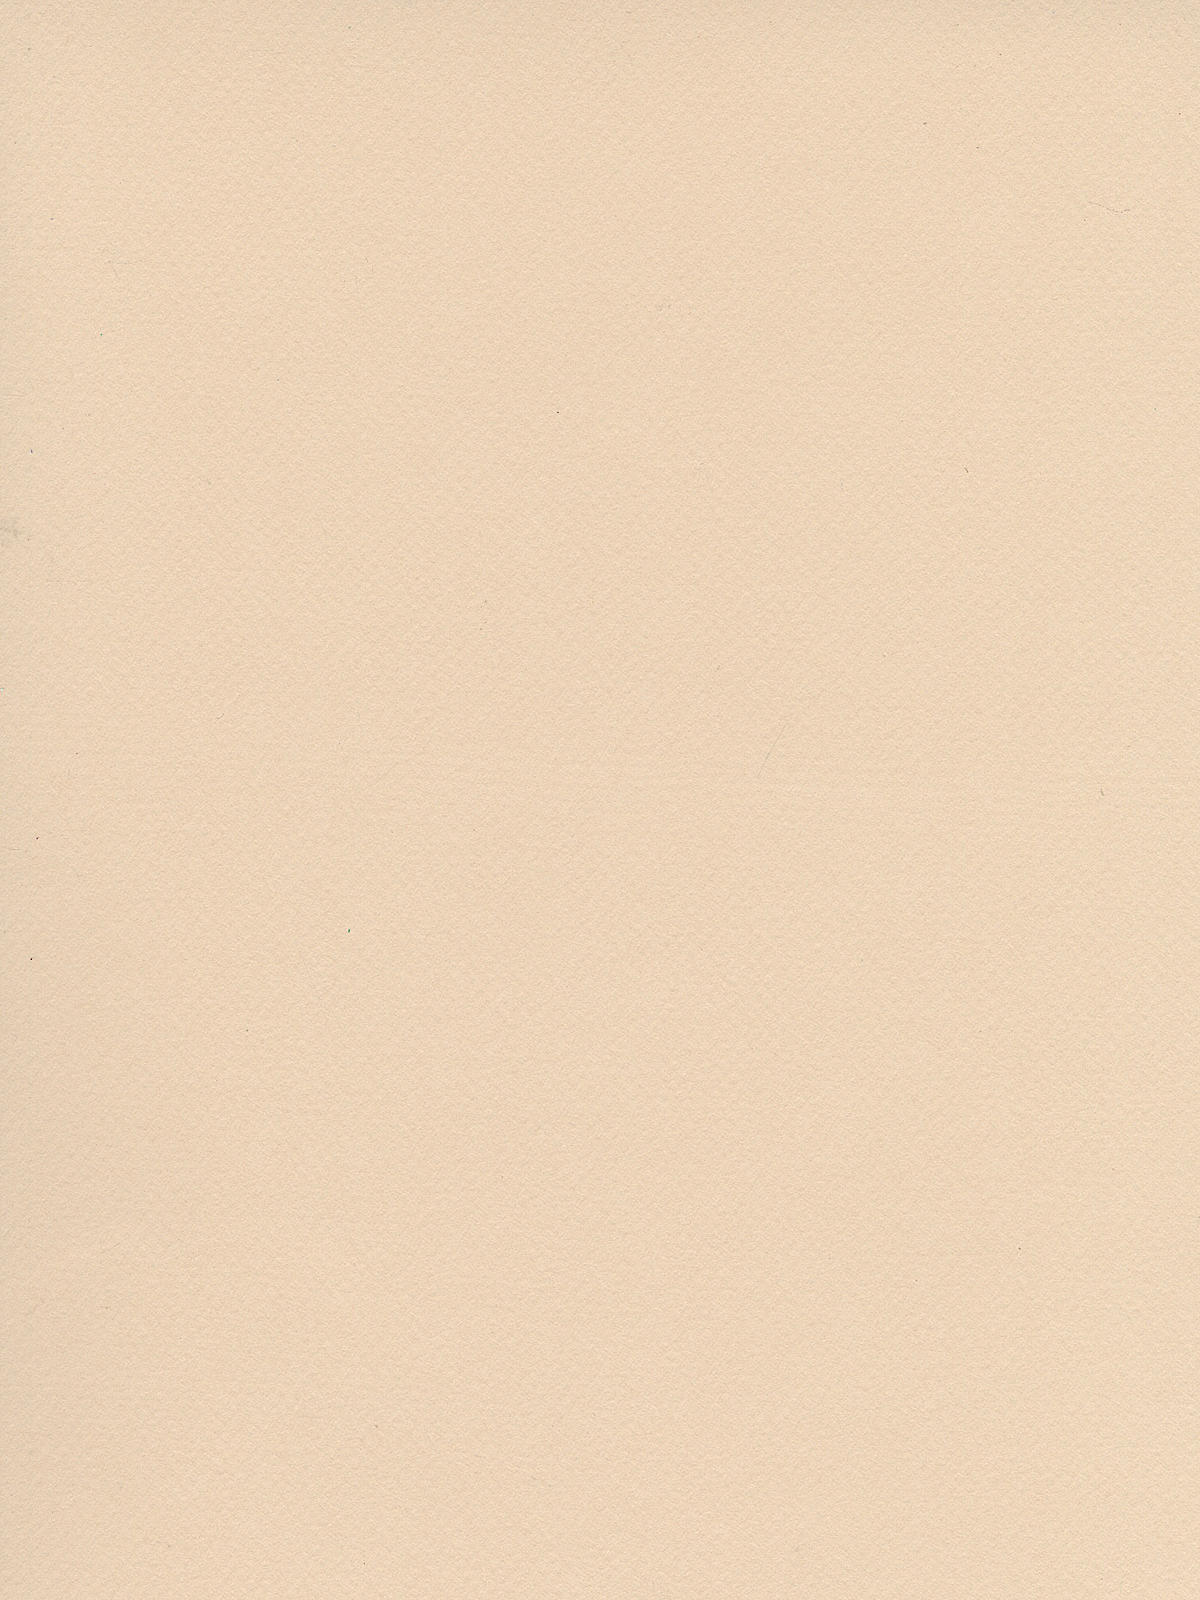 Mi-teintes Tinted Paper Egg Shell 19 In. X 25 In.